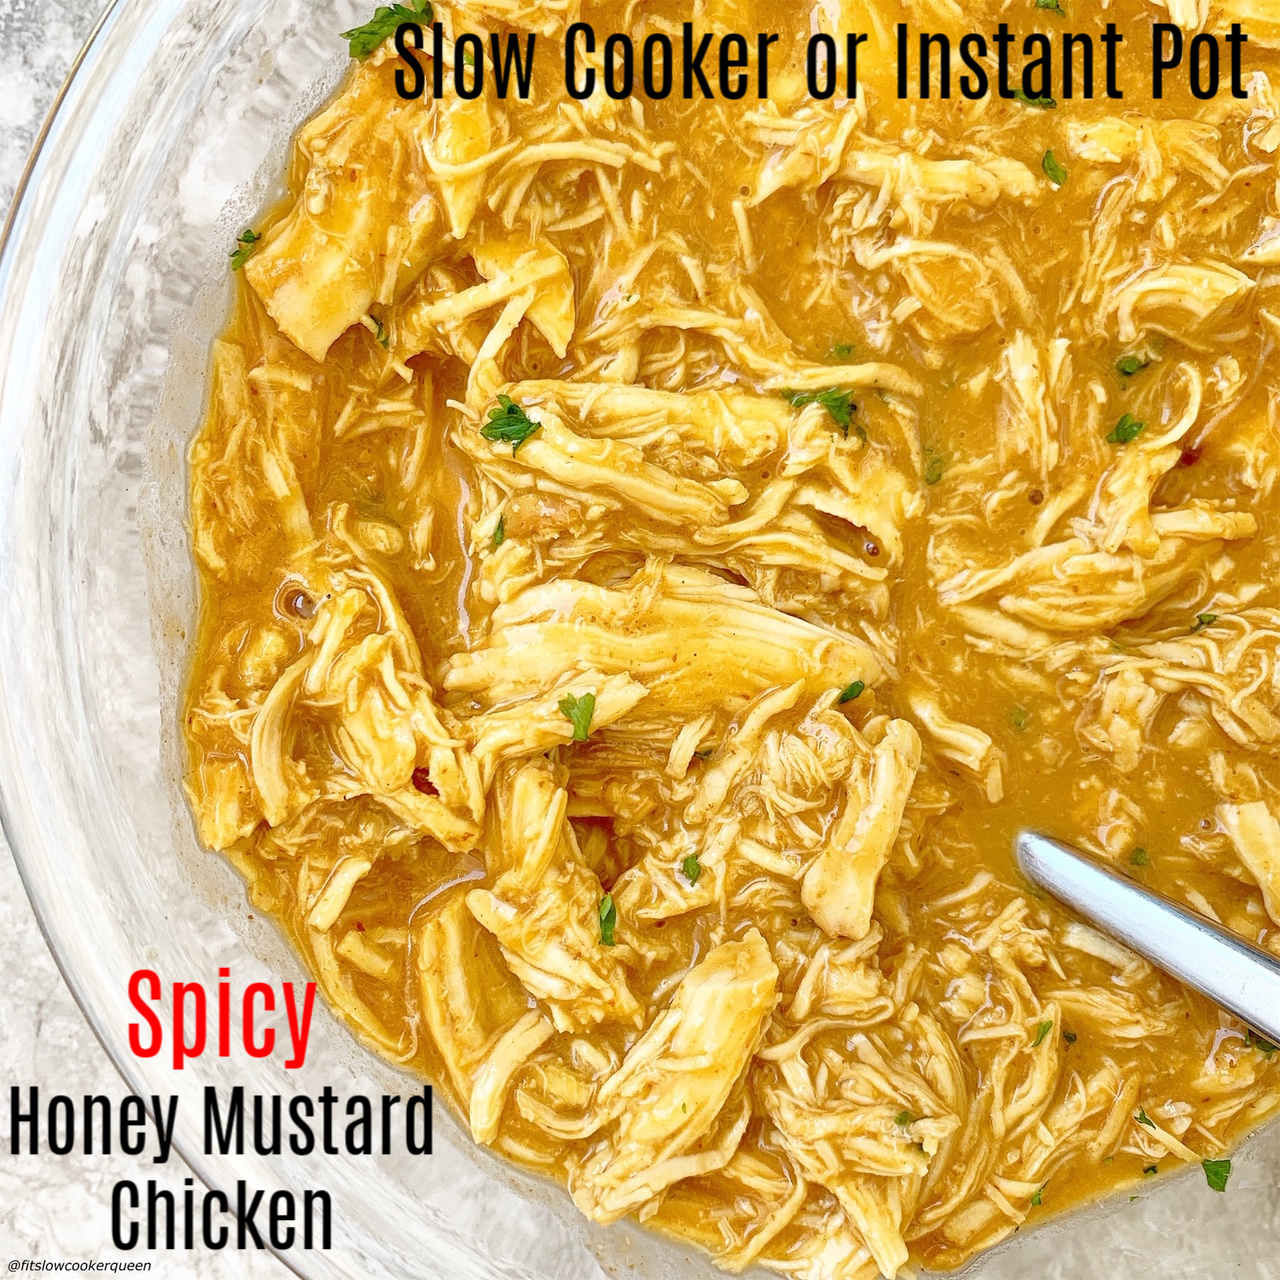 cover pic for 5-Ingredient slow cooker instant pot spicy honey mustard chicken